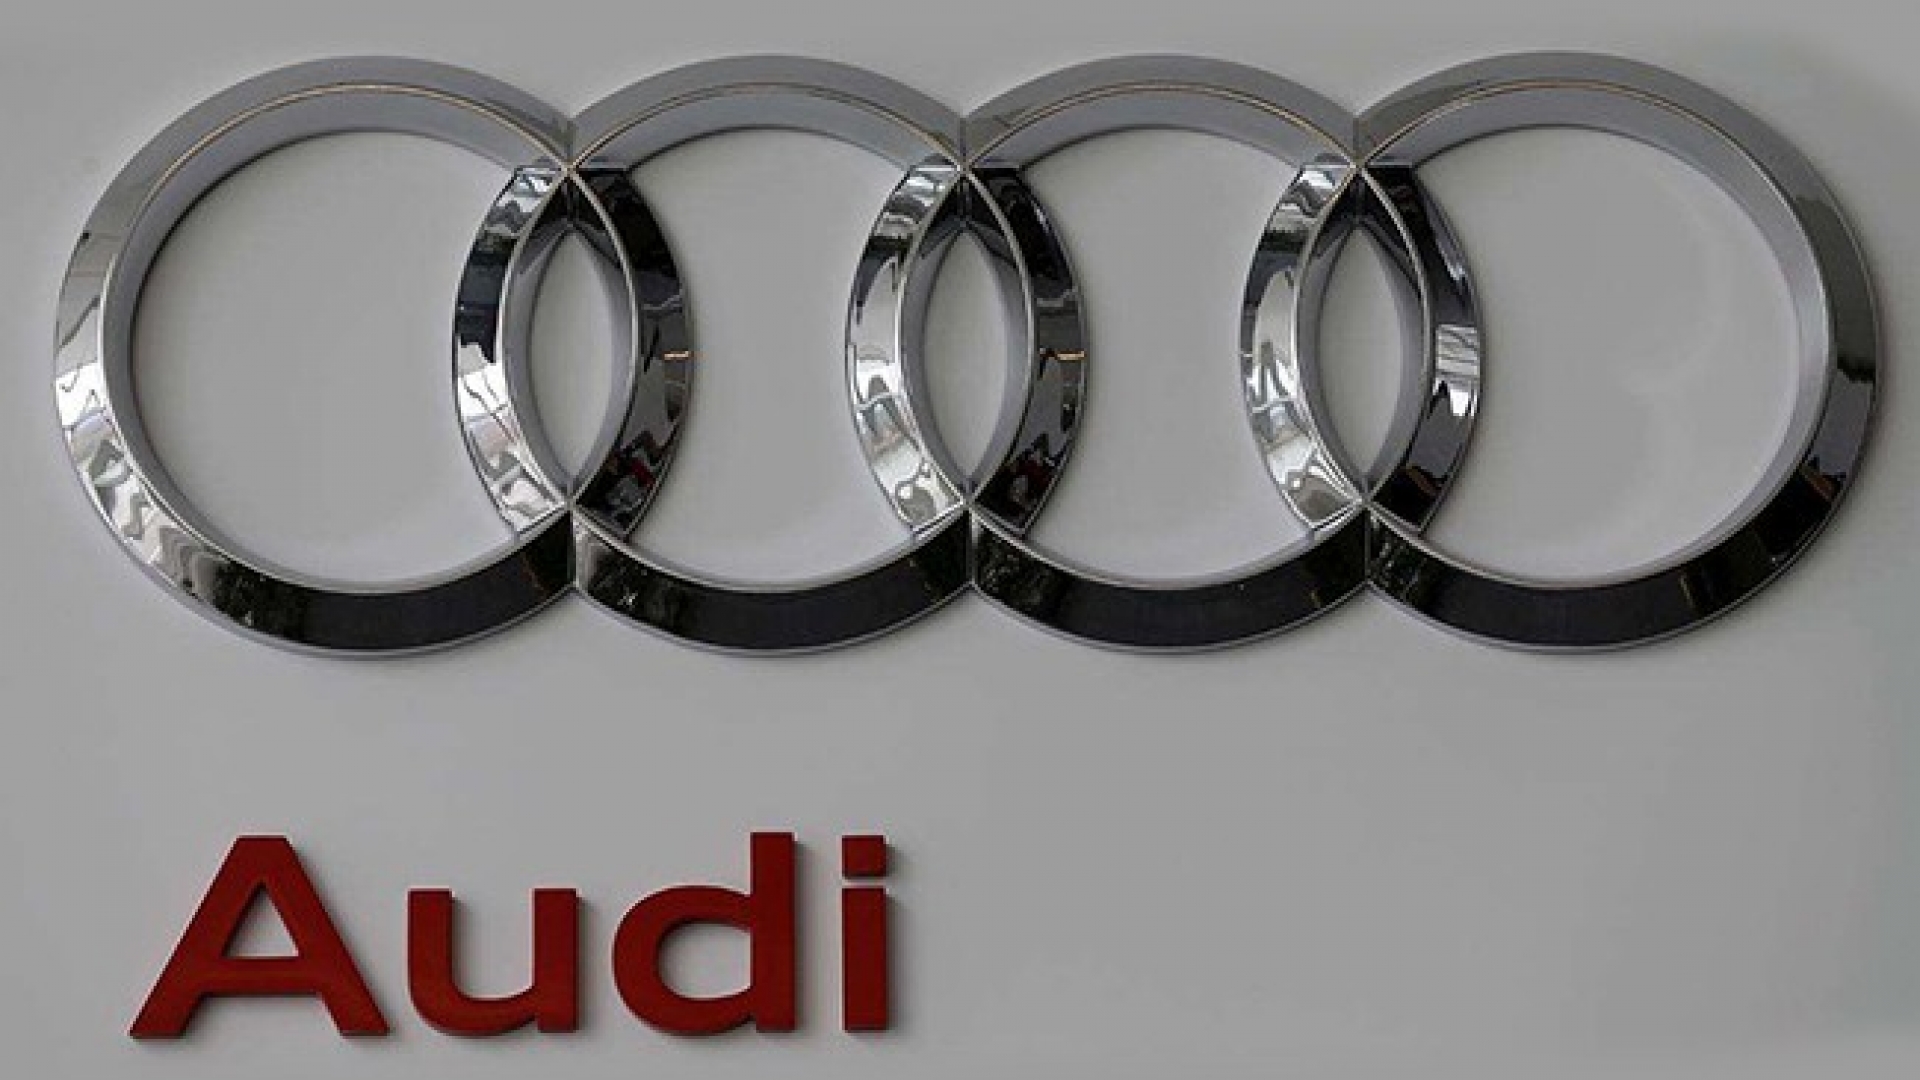 New Widescreen Car Stereos for Your Audi - XTRONS | Driving Entertainment